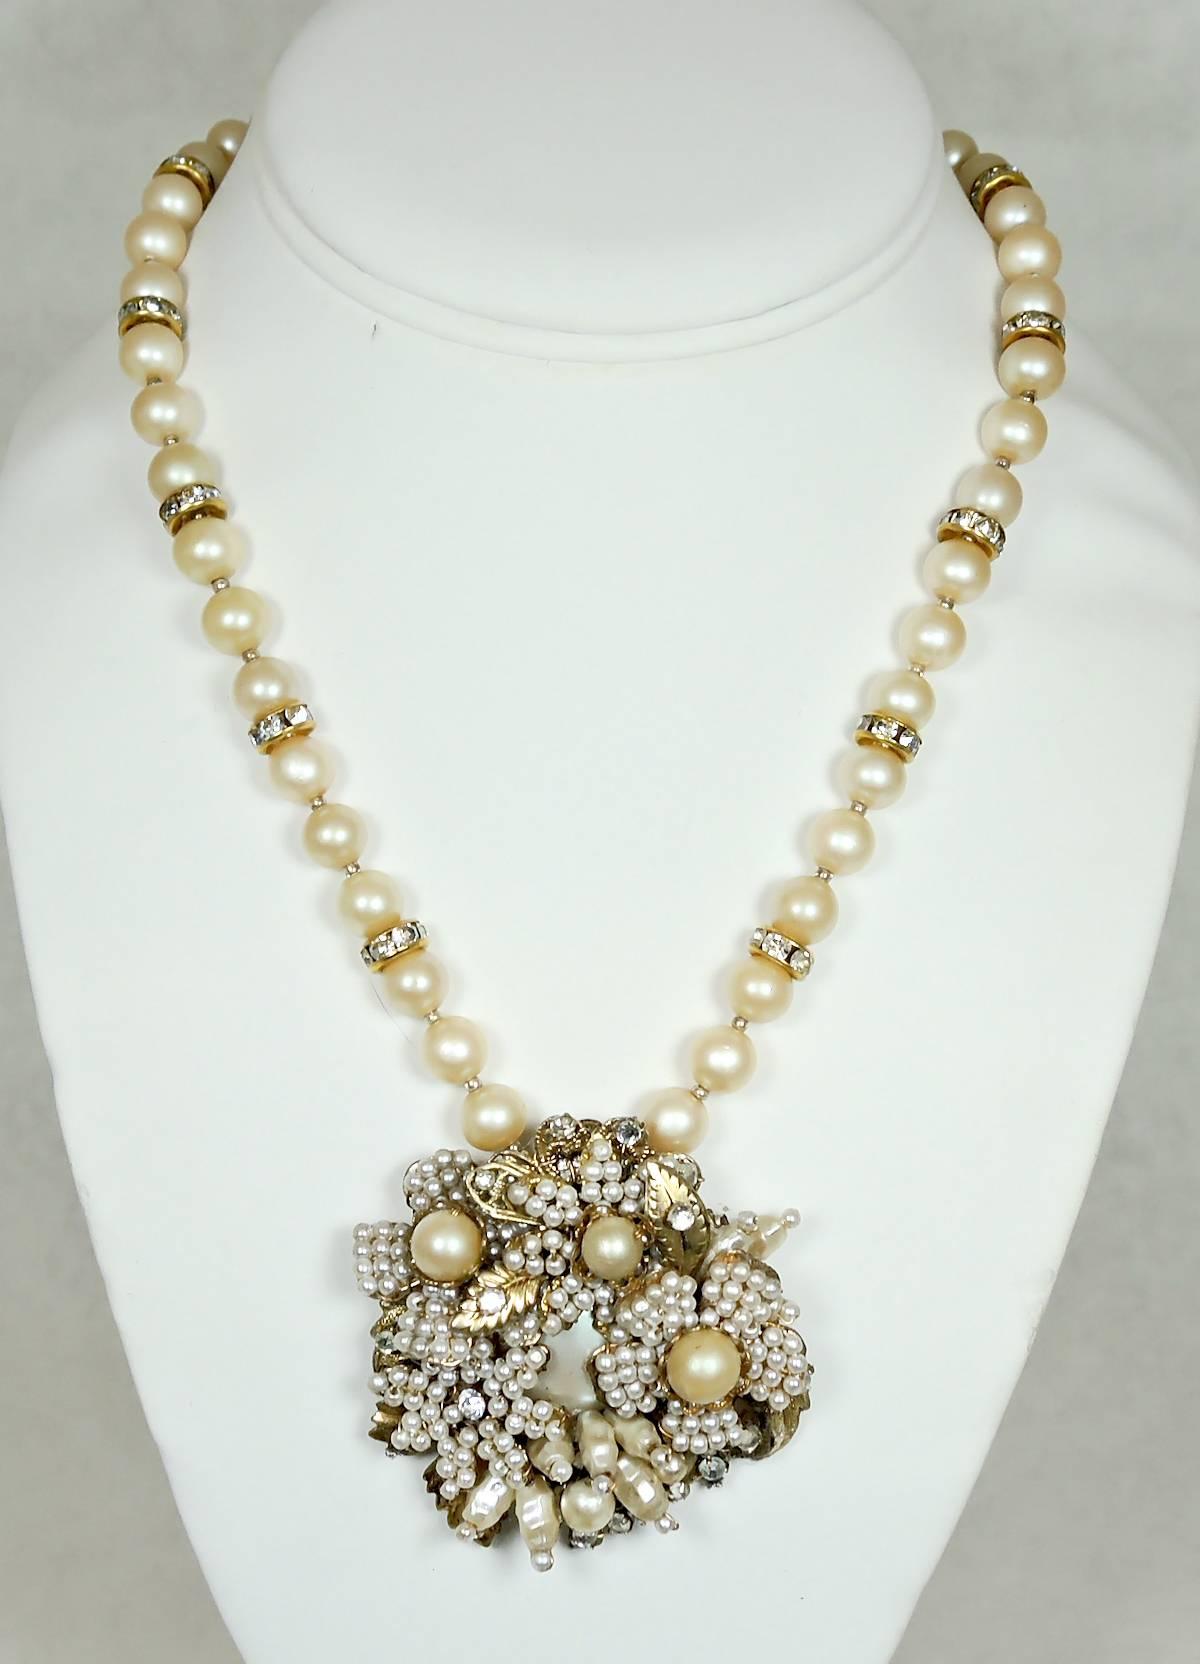 This lovely vintage 1950s Miriam Haskell necklace has cream color faux pearls accented with rhondelle spacers.  The necklace leads down to a beautiful centerpiece that has detailed floral faux seed pearls with golden flowers with three round faux